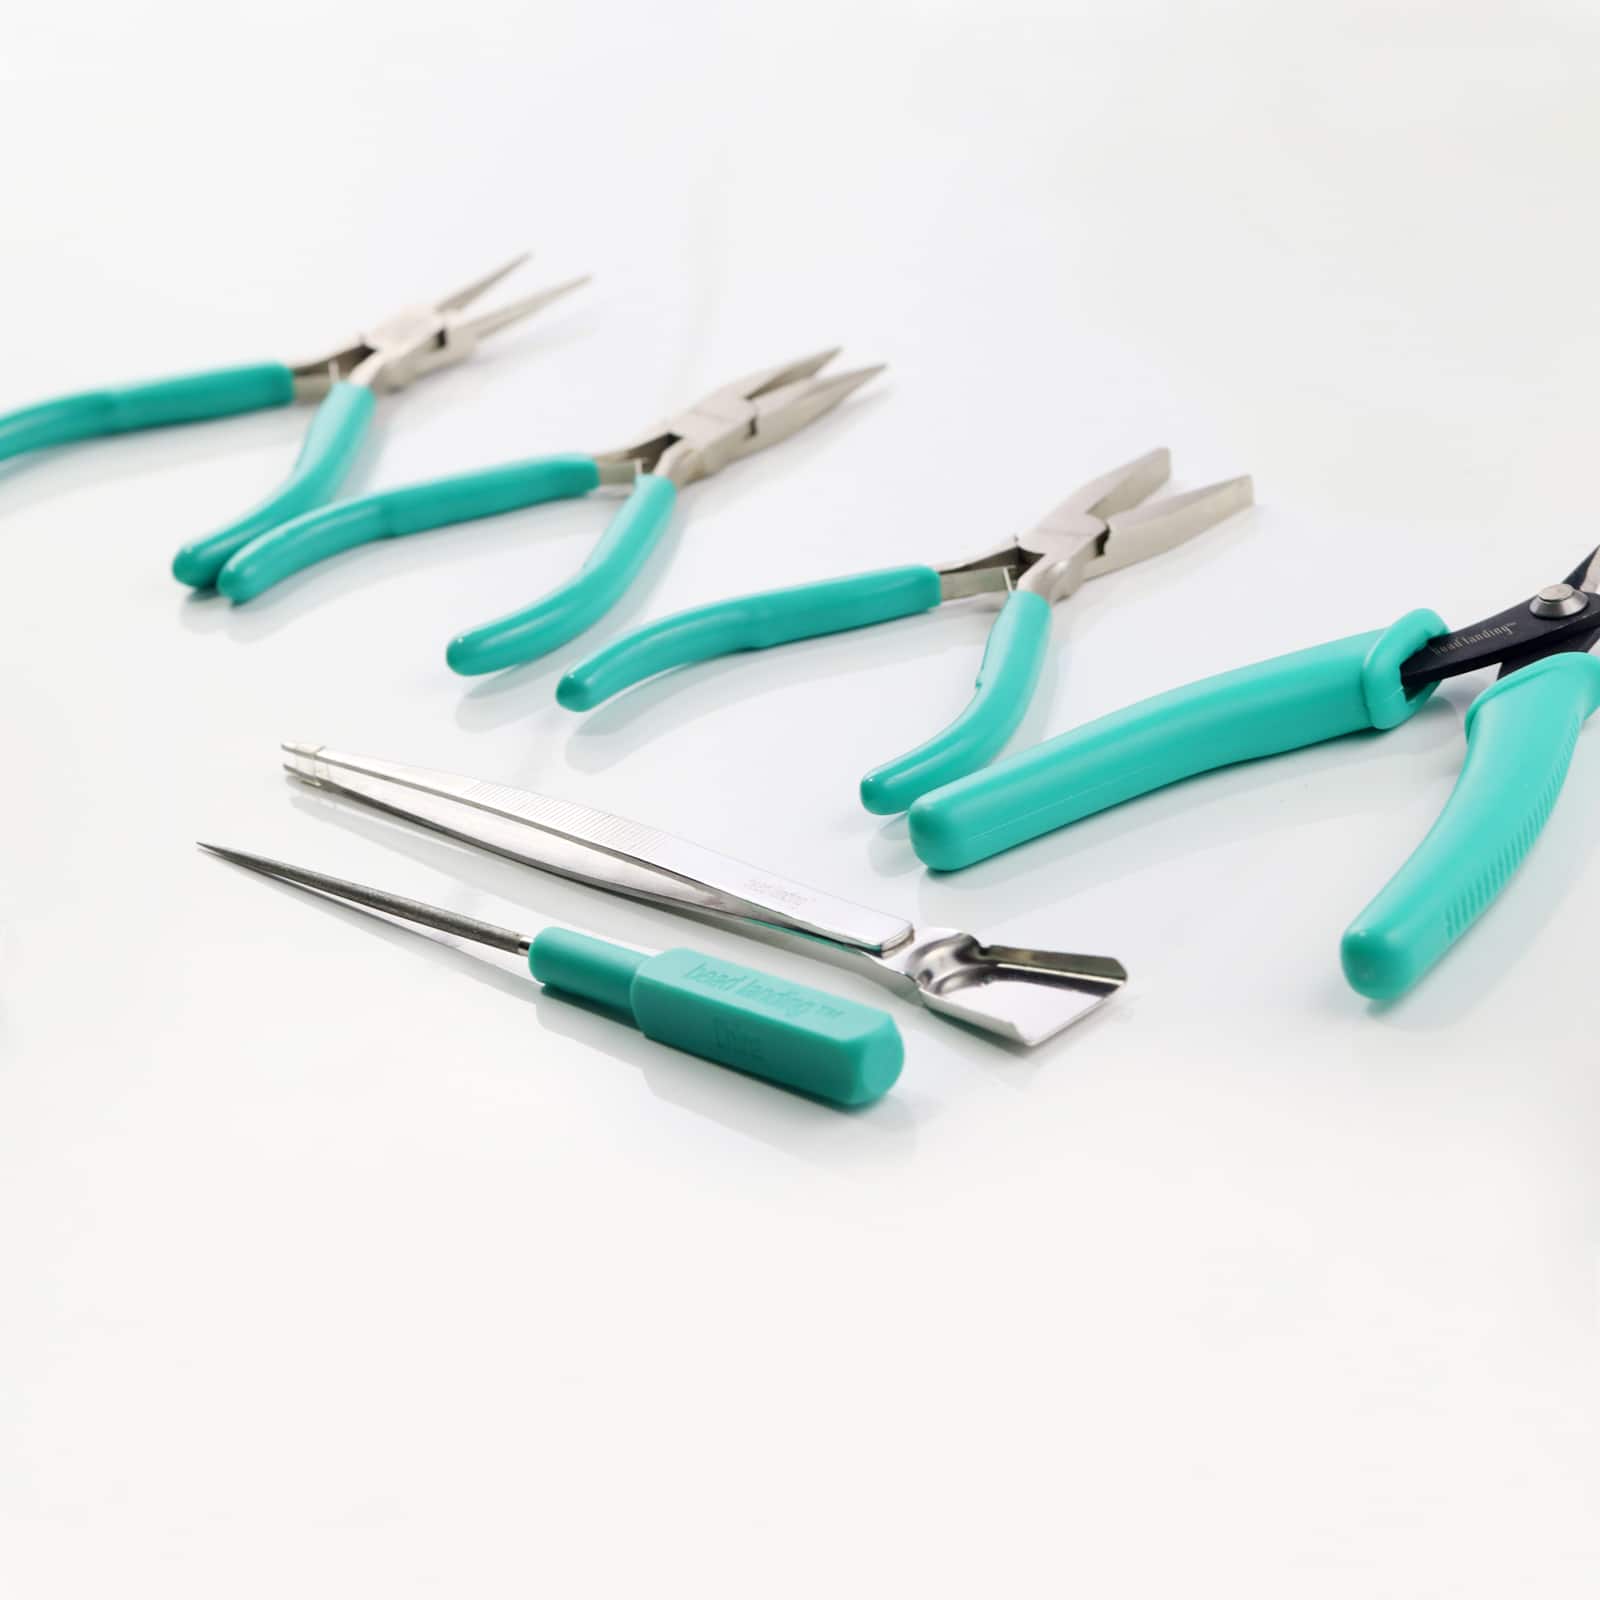 5 Packs Jewelry Pliers Set, Jewelry Making Tools with Needle Nose